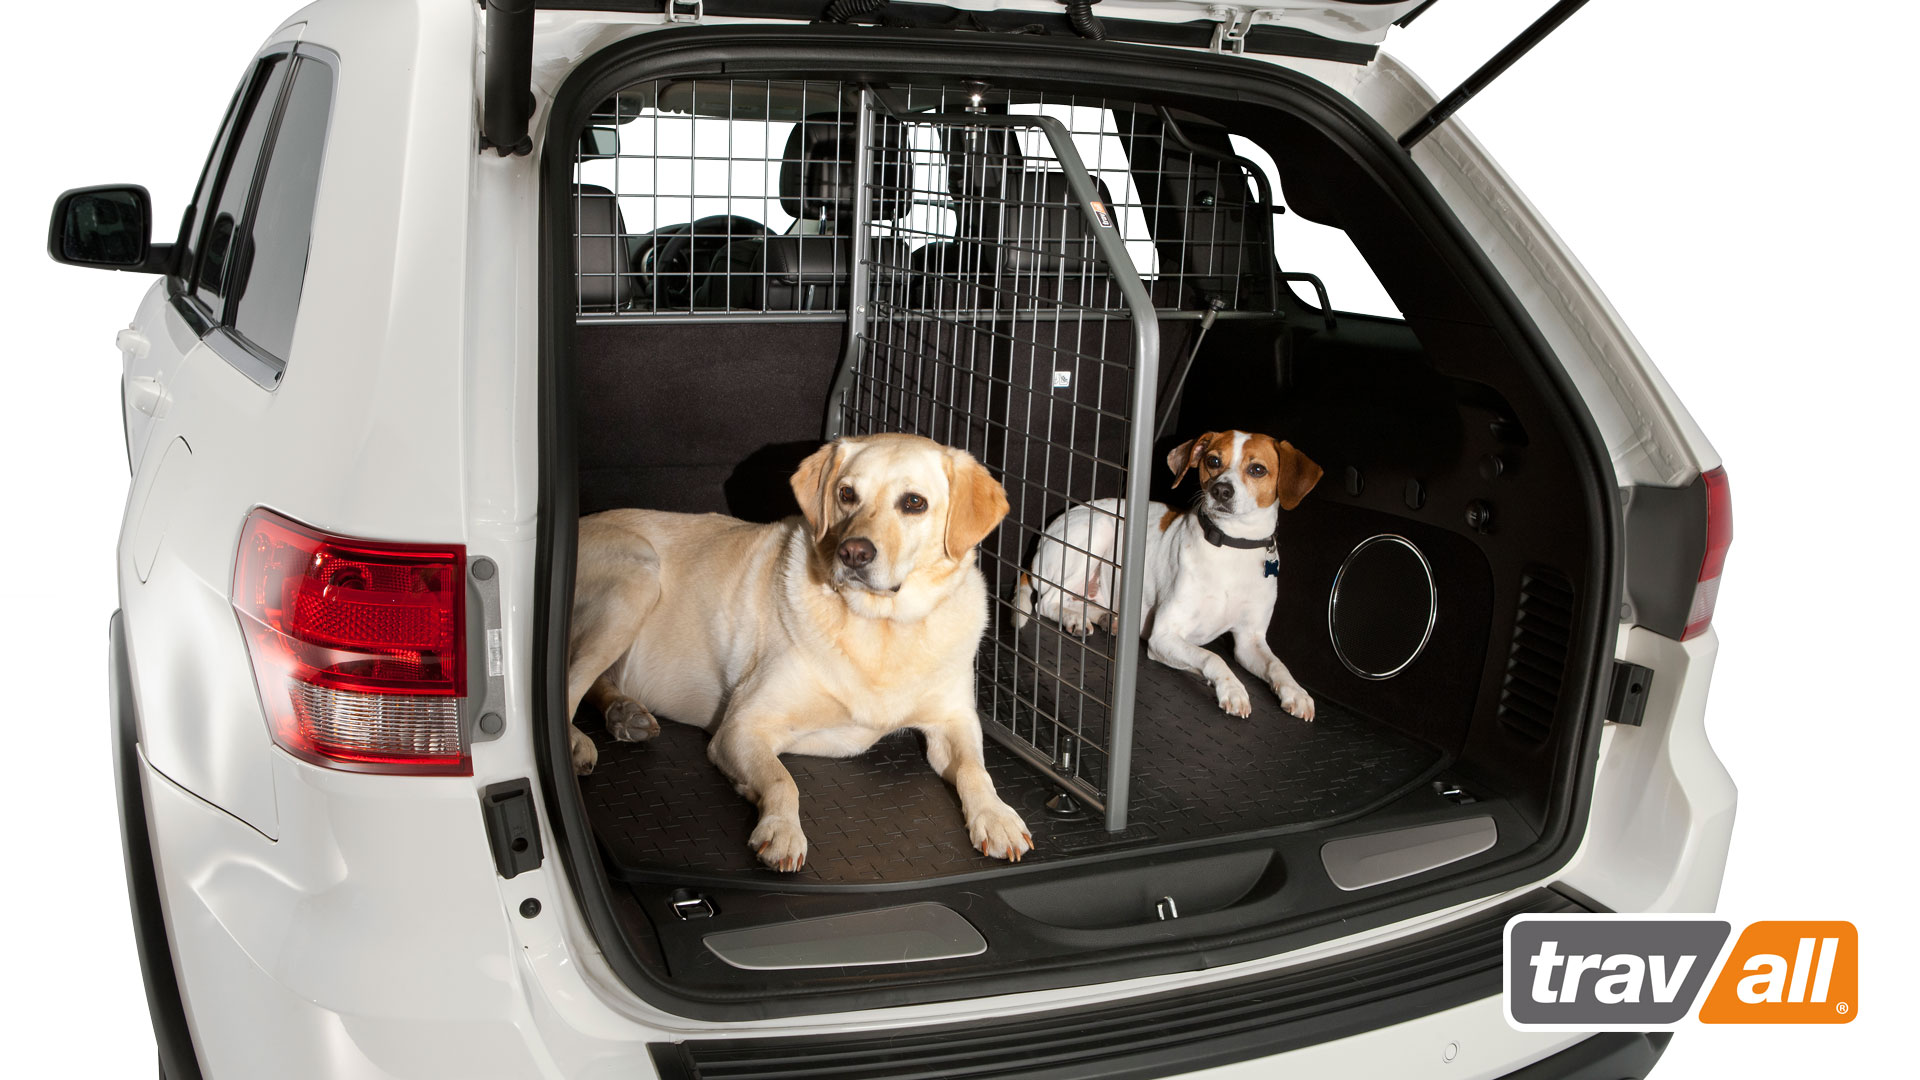 Is Your Dog's Car Harness, Travel Crate, or Carrier Crash-Test